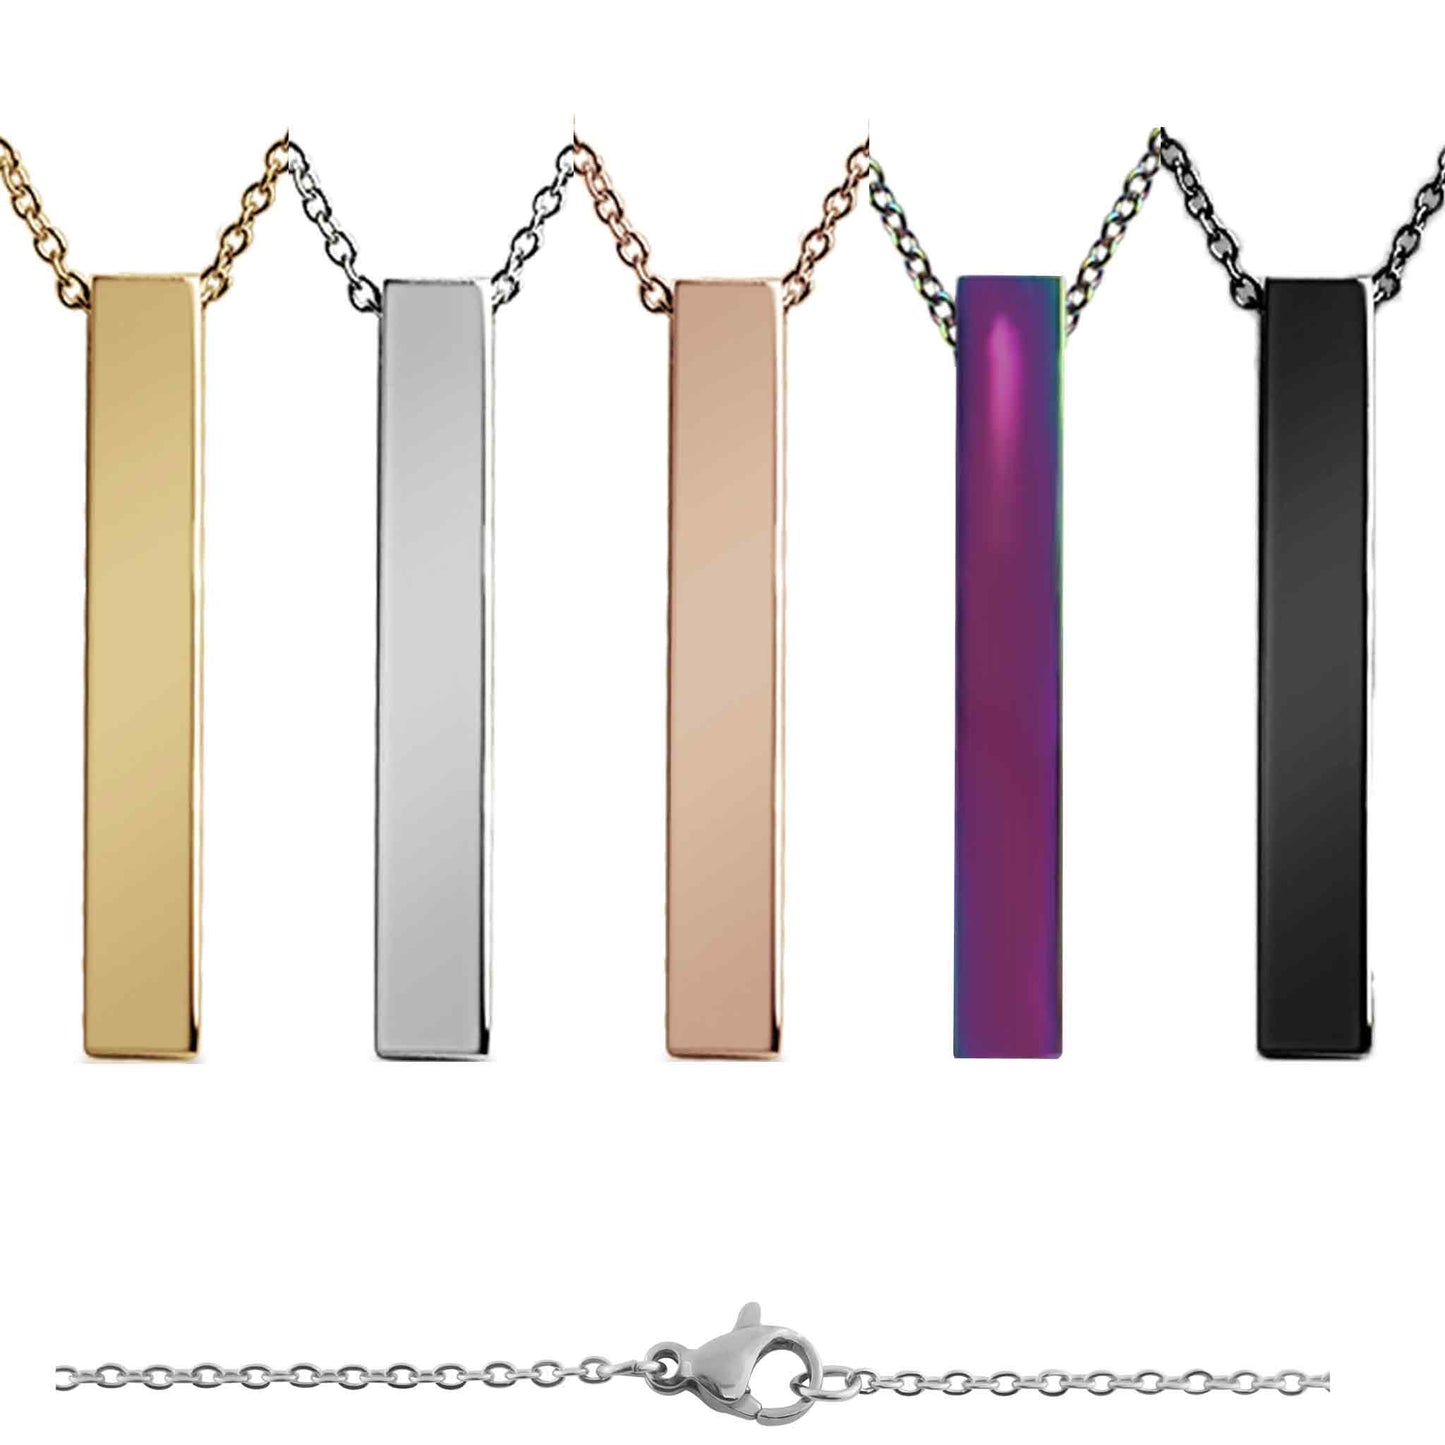 Blank Unisex Stainless Steel Bar Necklace